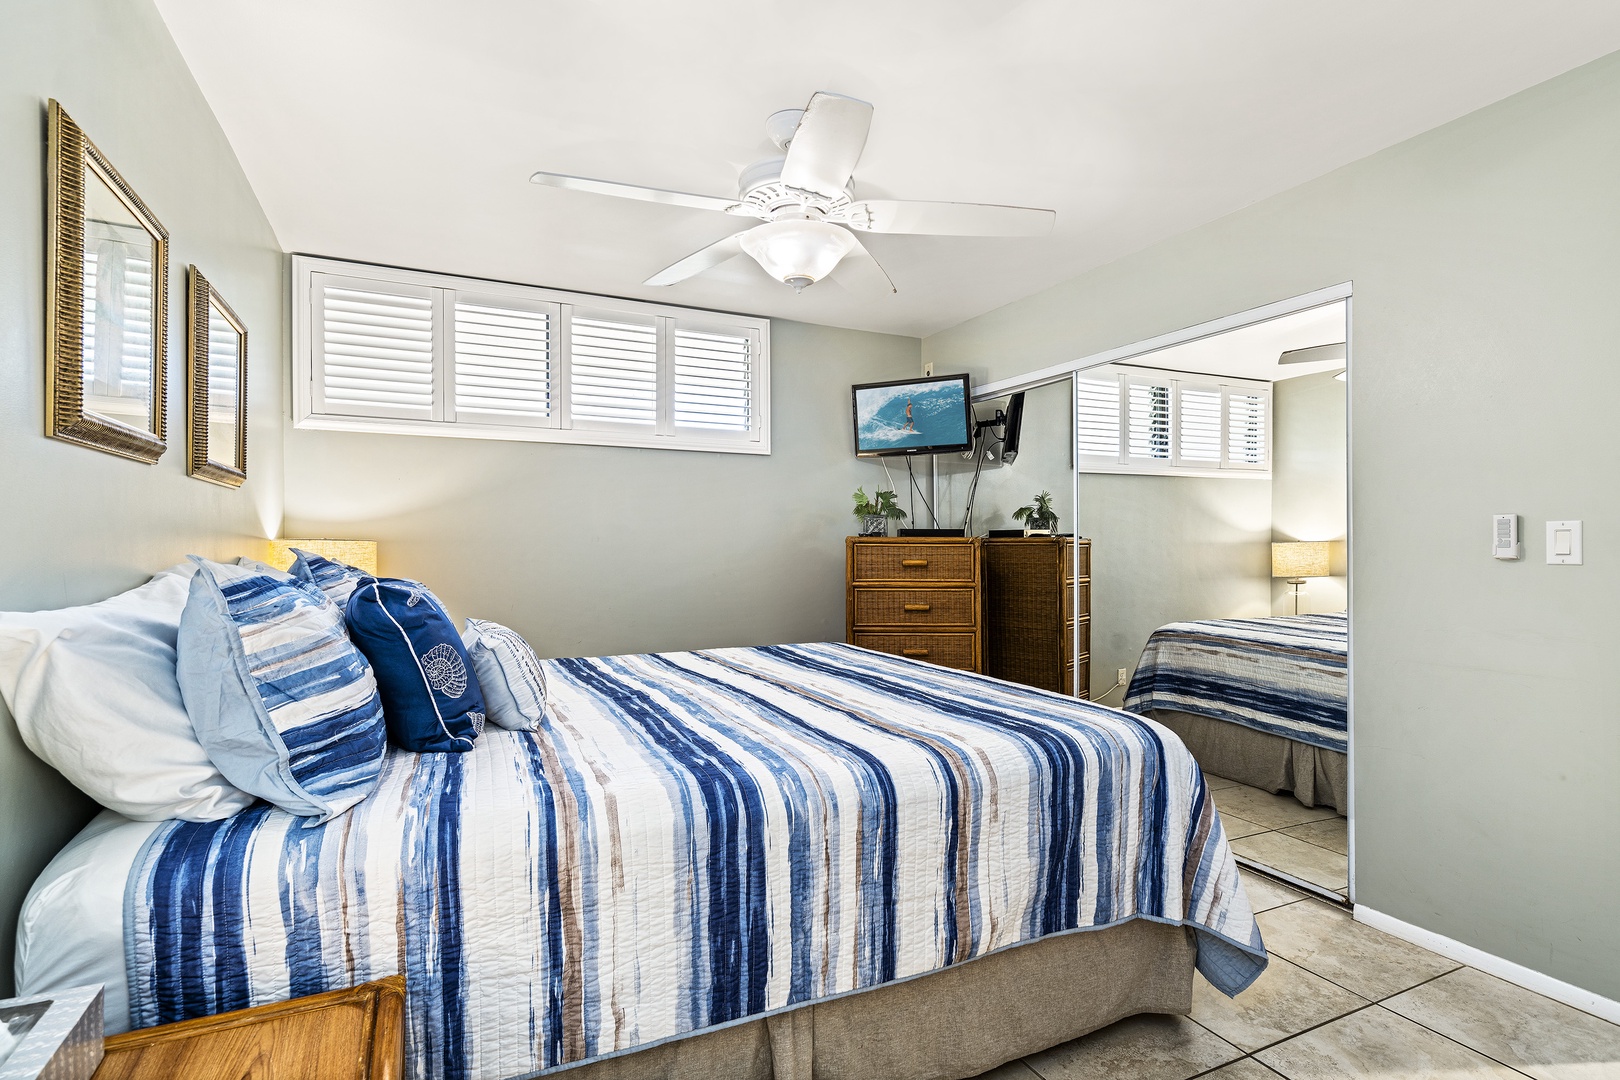 Kailua Kona Vacation Rentals, Sea Village 1105 - TV in the primary with ceiling fans to keep it cool